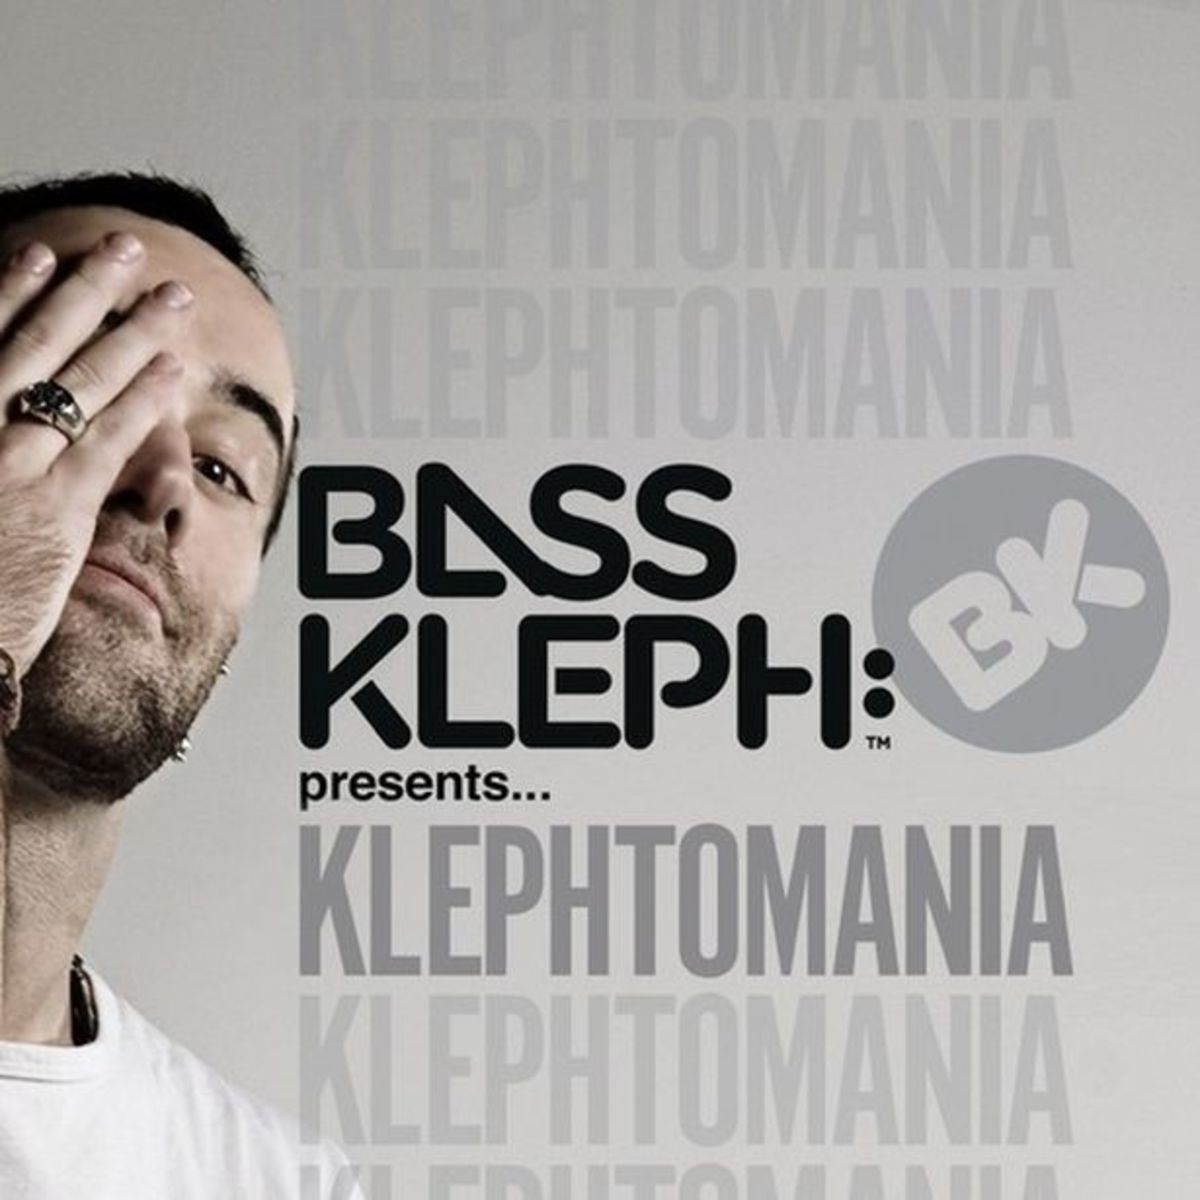 EDM Download: Bass Kleph's Monthly Podcast; Plus- Watch Him Remix Borgore X Carnage's "Incredible" Live